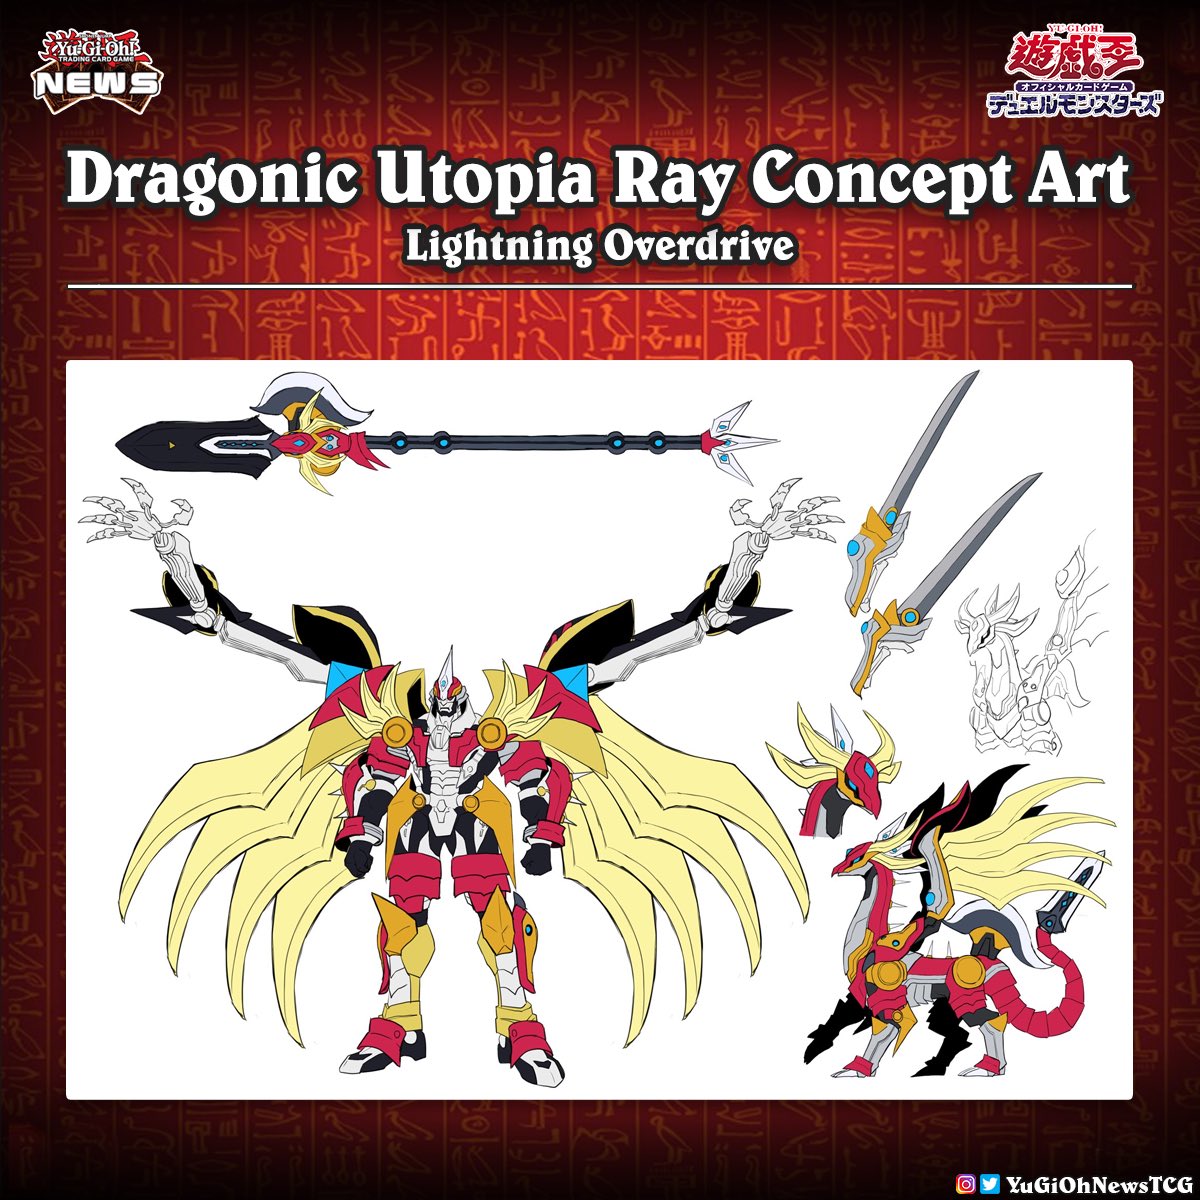 ❰𝗟𝗶𝗴𝗵𝘁𝗻𝗶𝗻𝗴 𝗢𝘃𝗲𝗿𝗱𝗿𝗶𝘃𝗲❱Check out some early concept art for Dragonic Utopia Ray ...